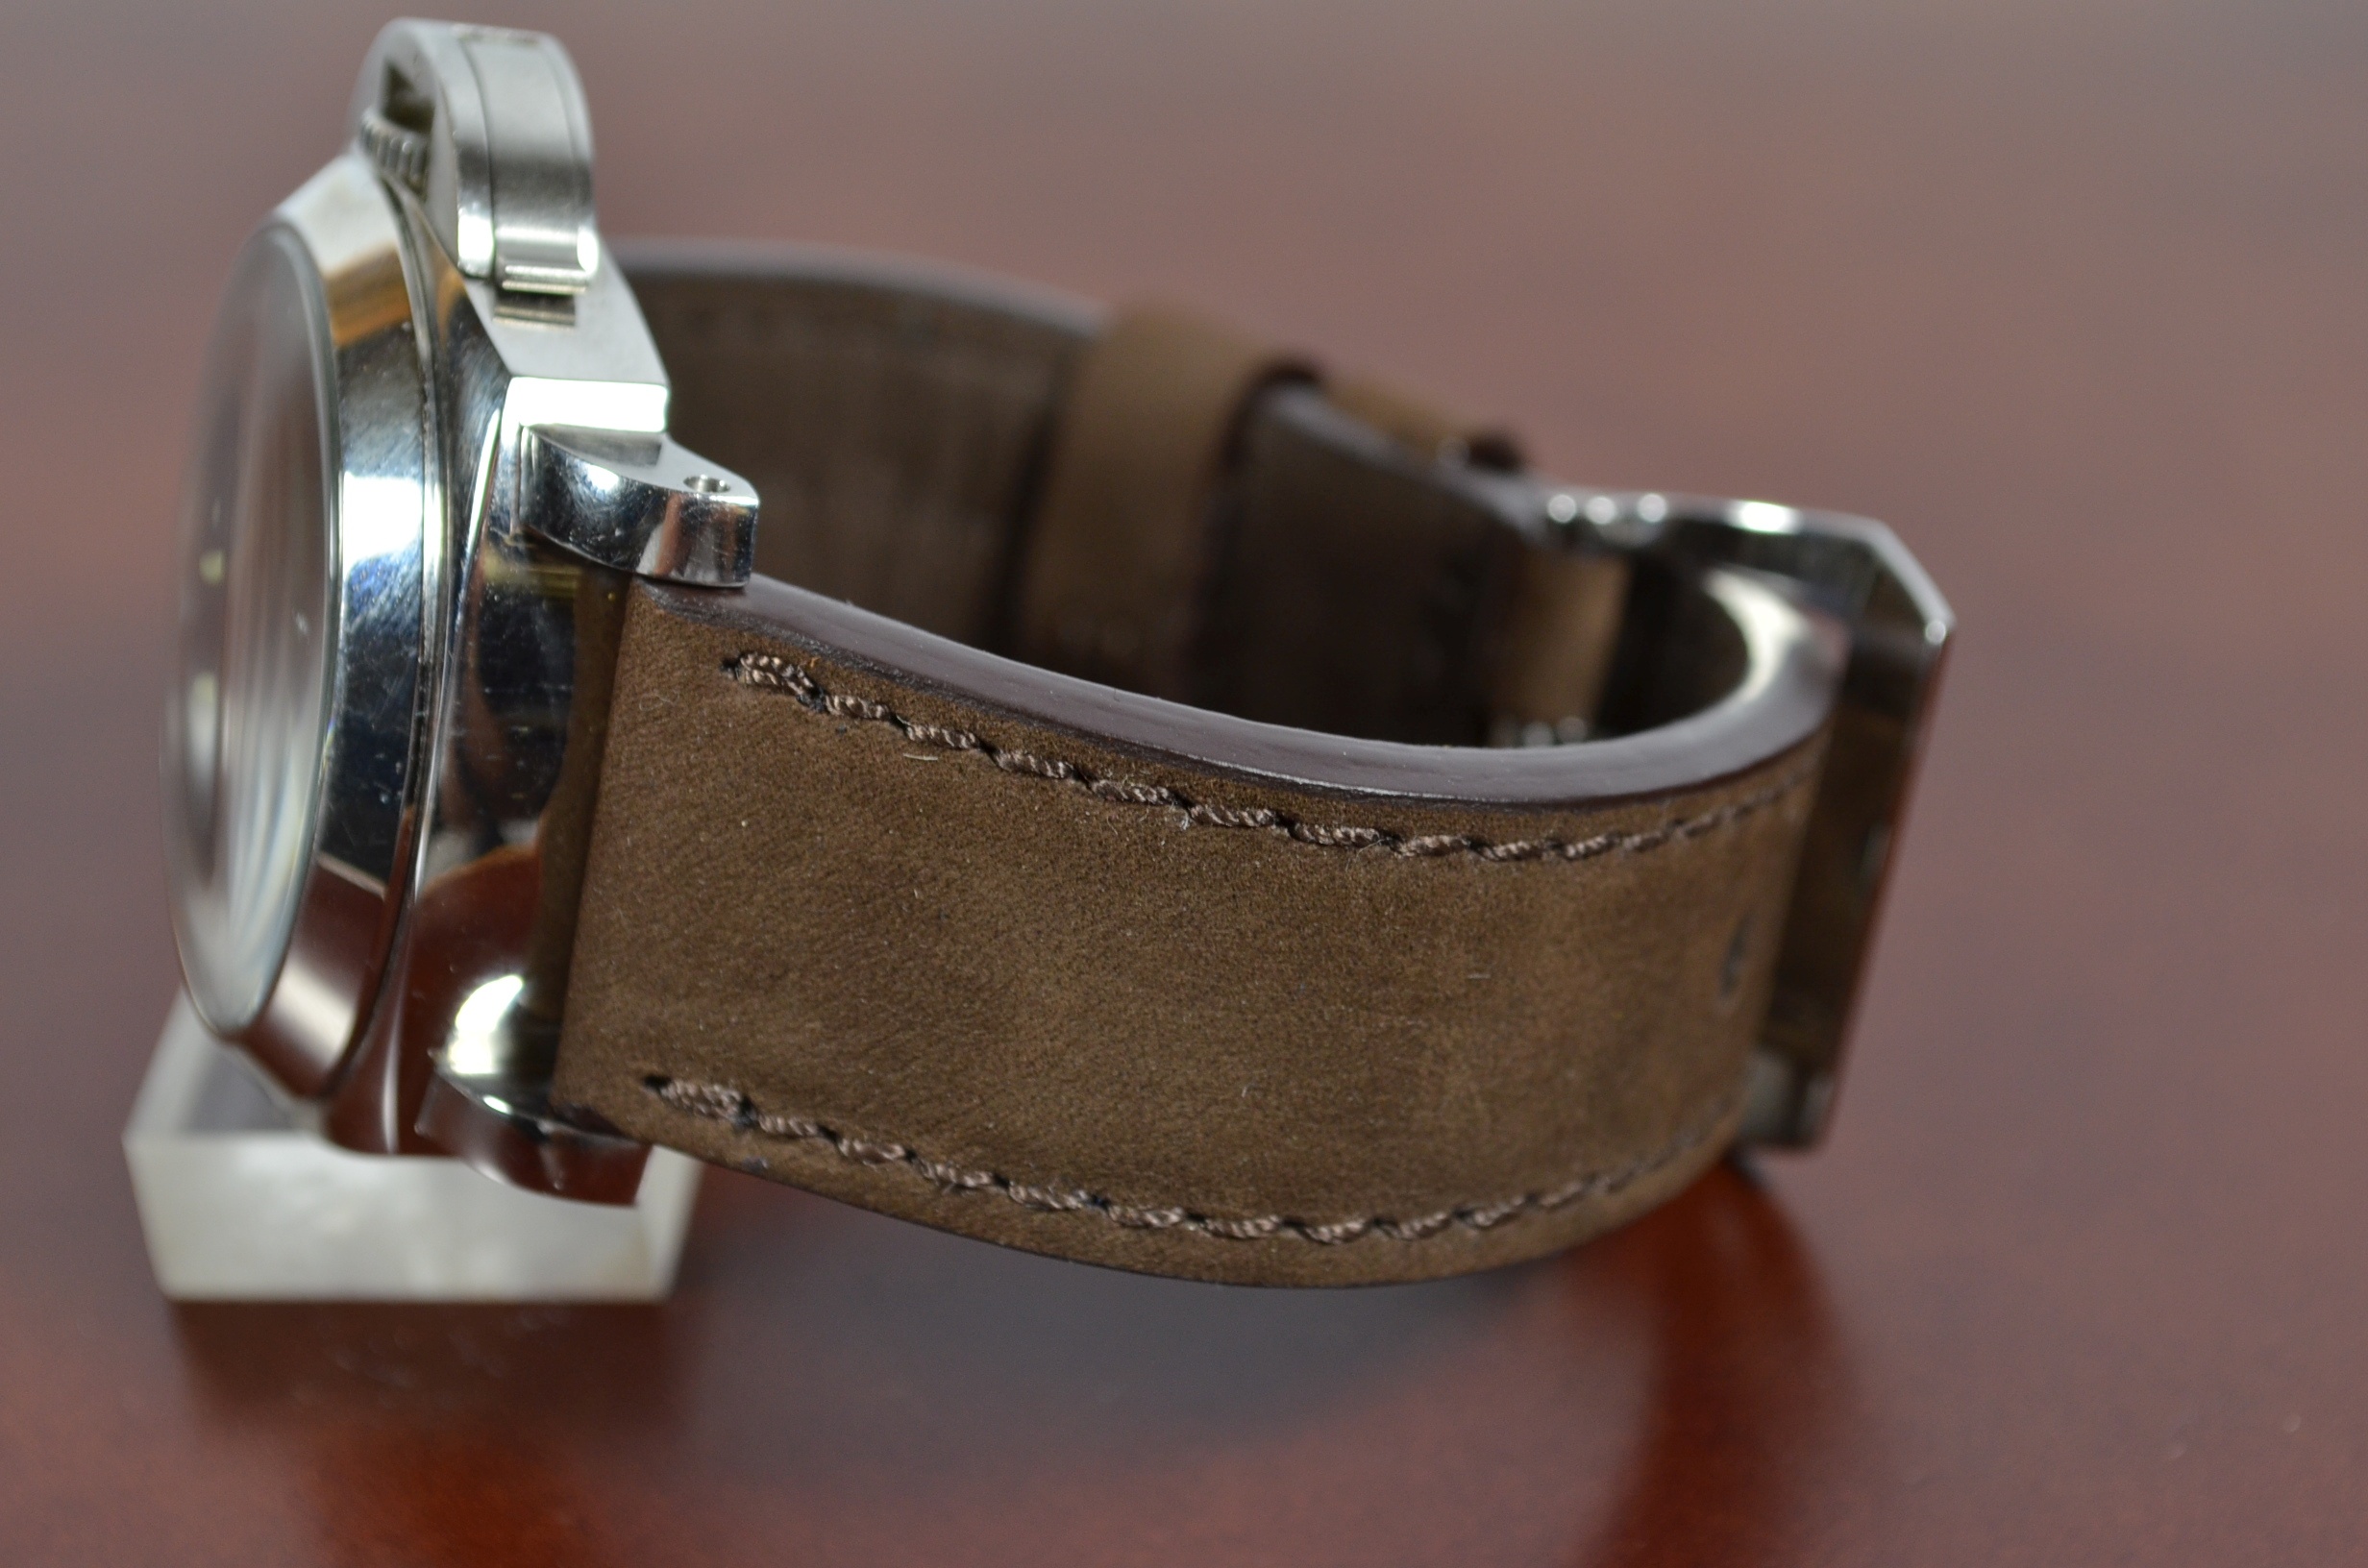 I BROWN is one of our hand crafted watch straps. Available in brown color, 3.5 - 4 mm thick.